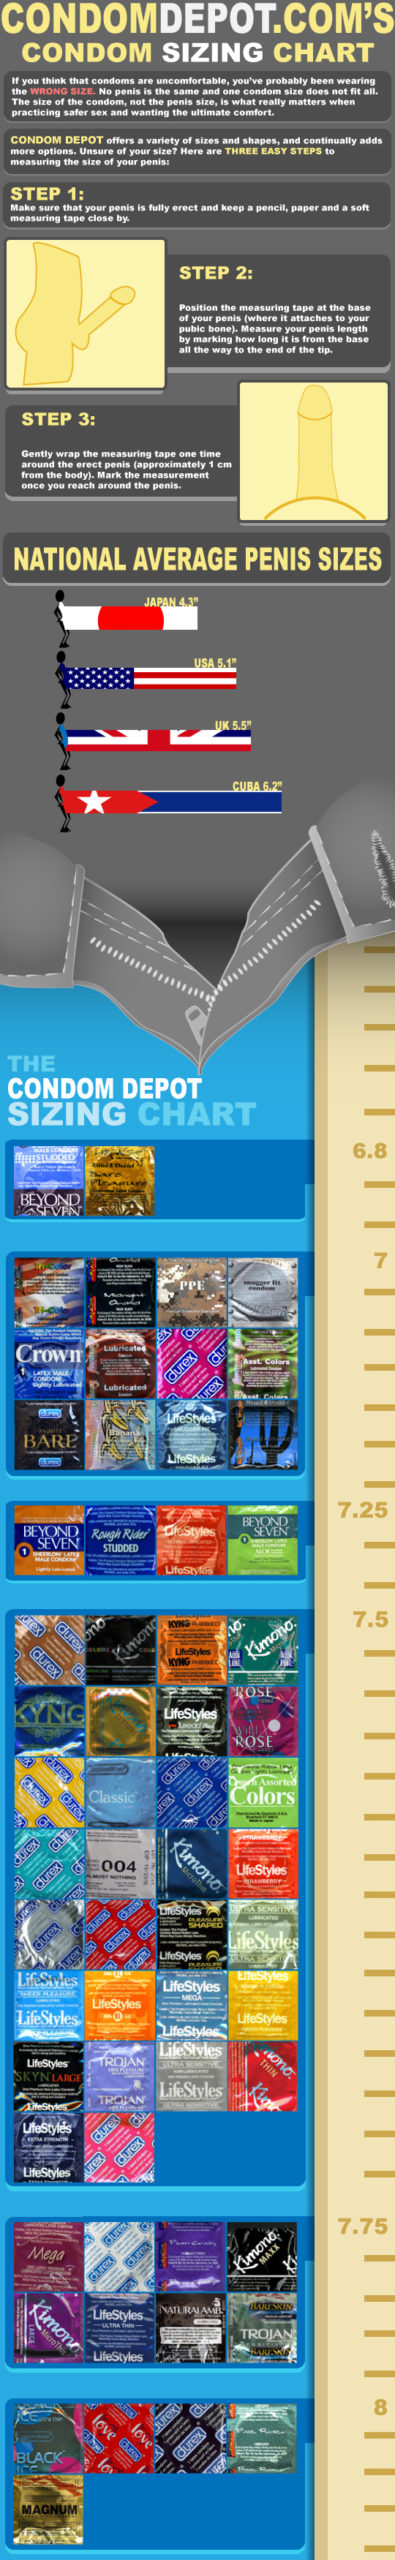 Use This Infographic To Help You Find The Right Sized Condom